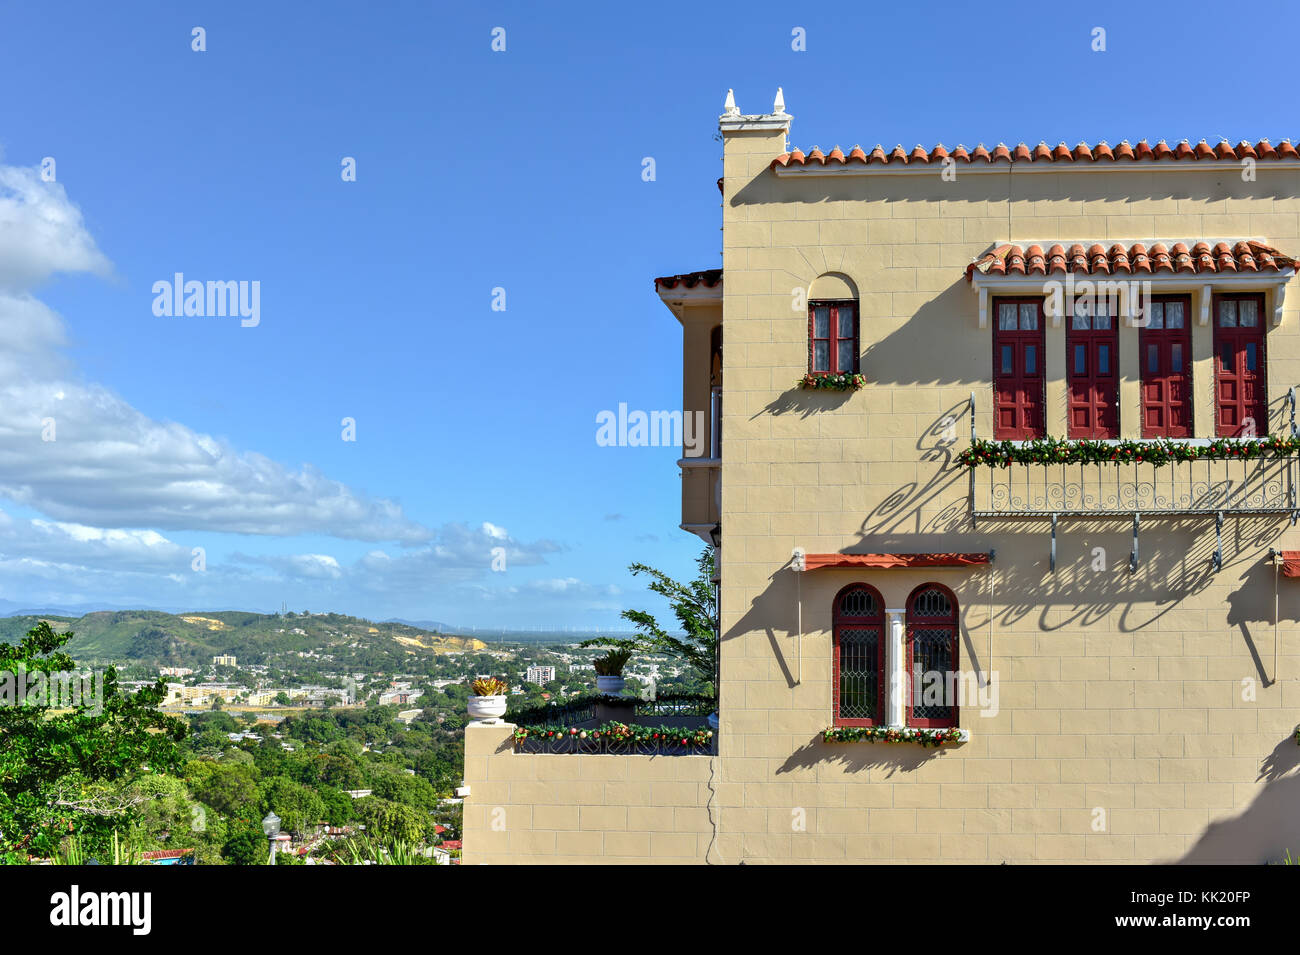 Castillo Serralles (Serralles Castle) is a mansion located in the city of Ponce, Puerto Rico, overlooking the downtown area (Ponce Pueblo). Stock Photo